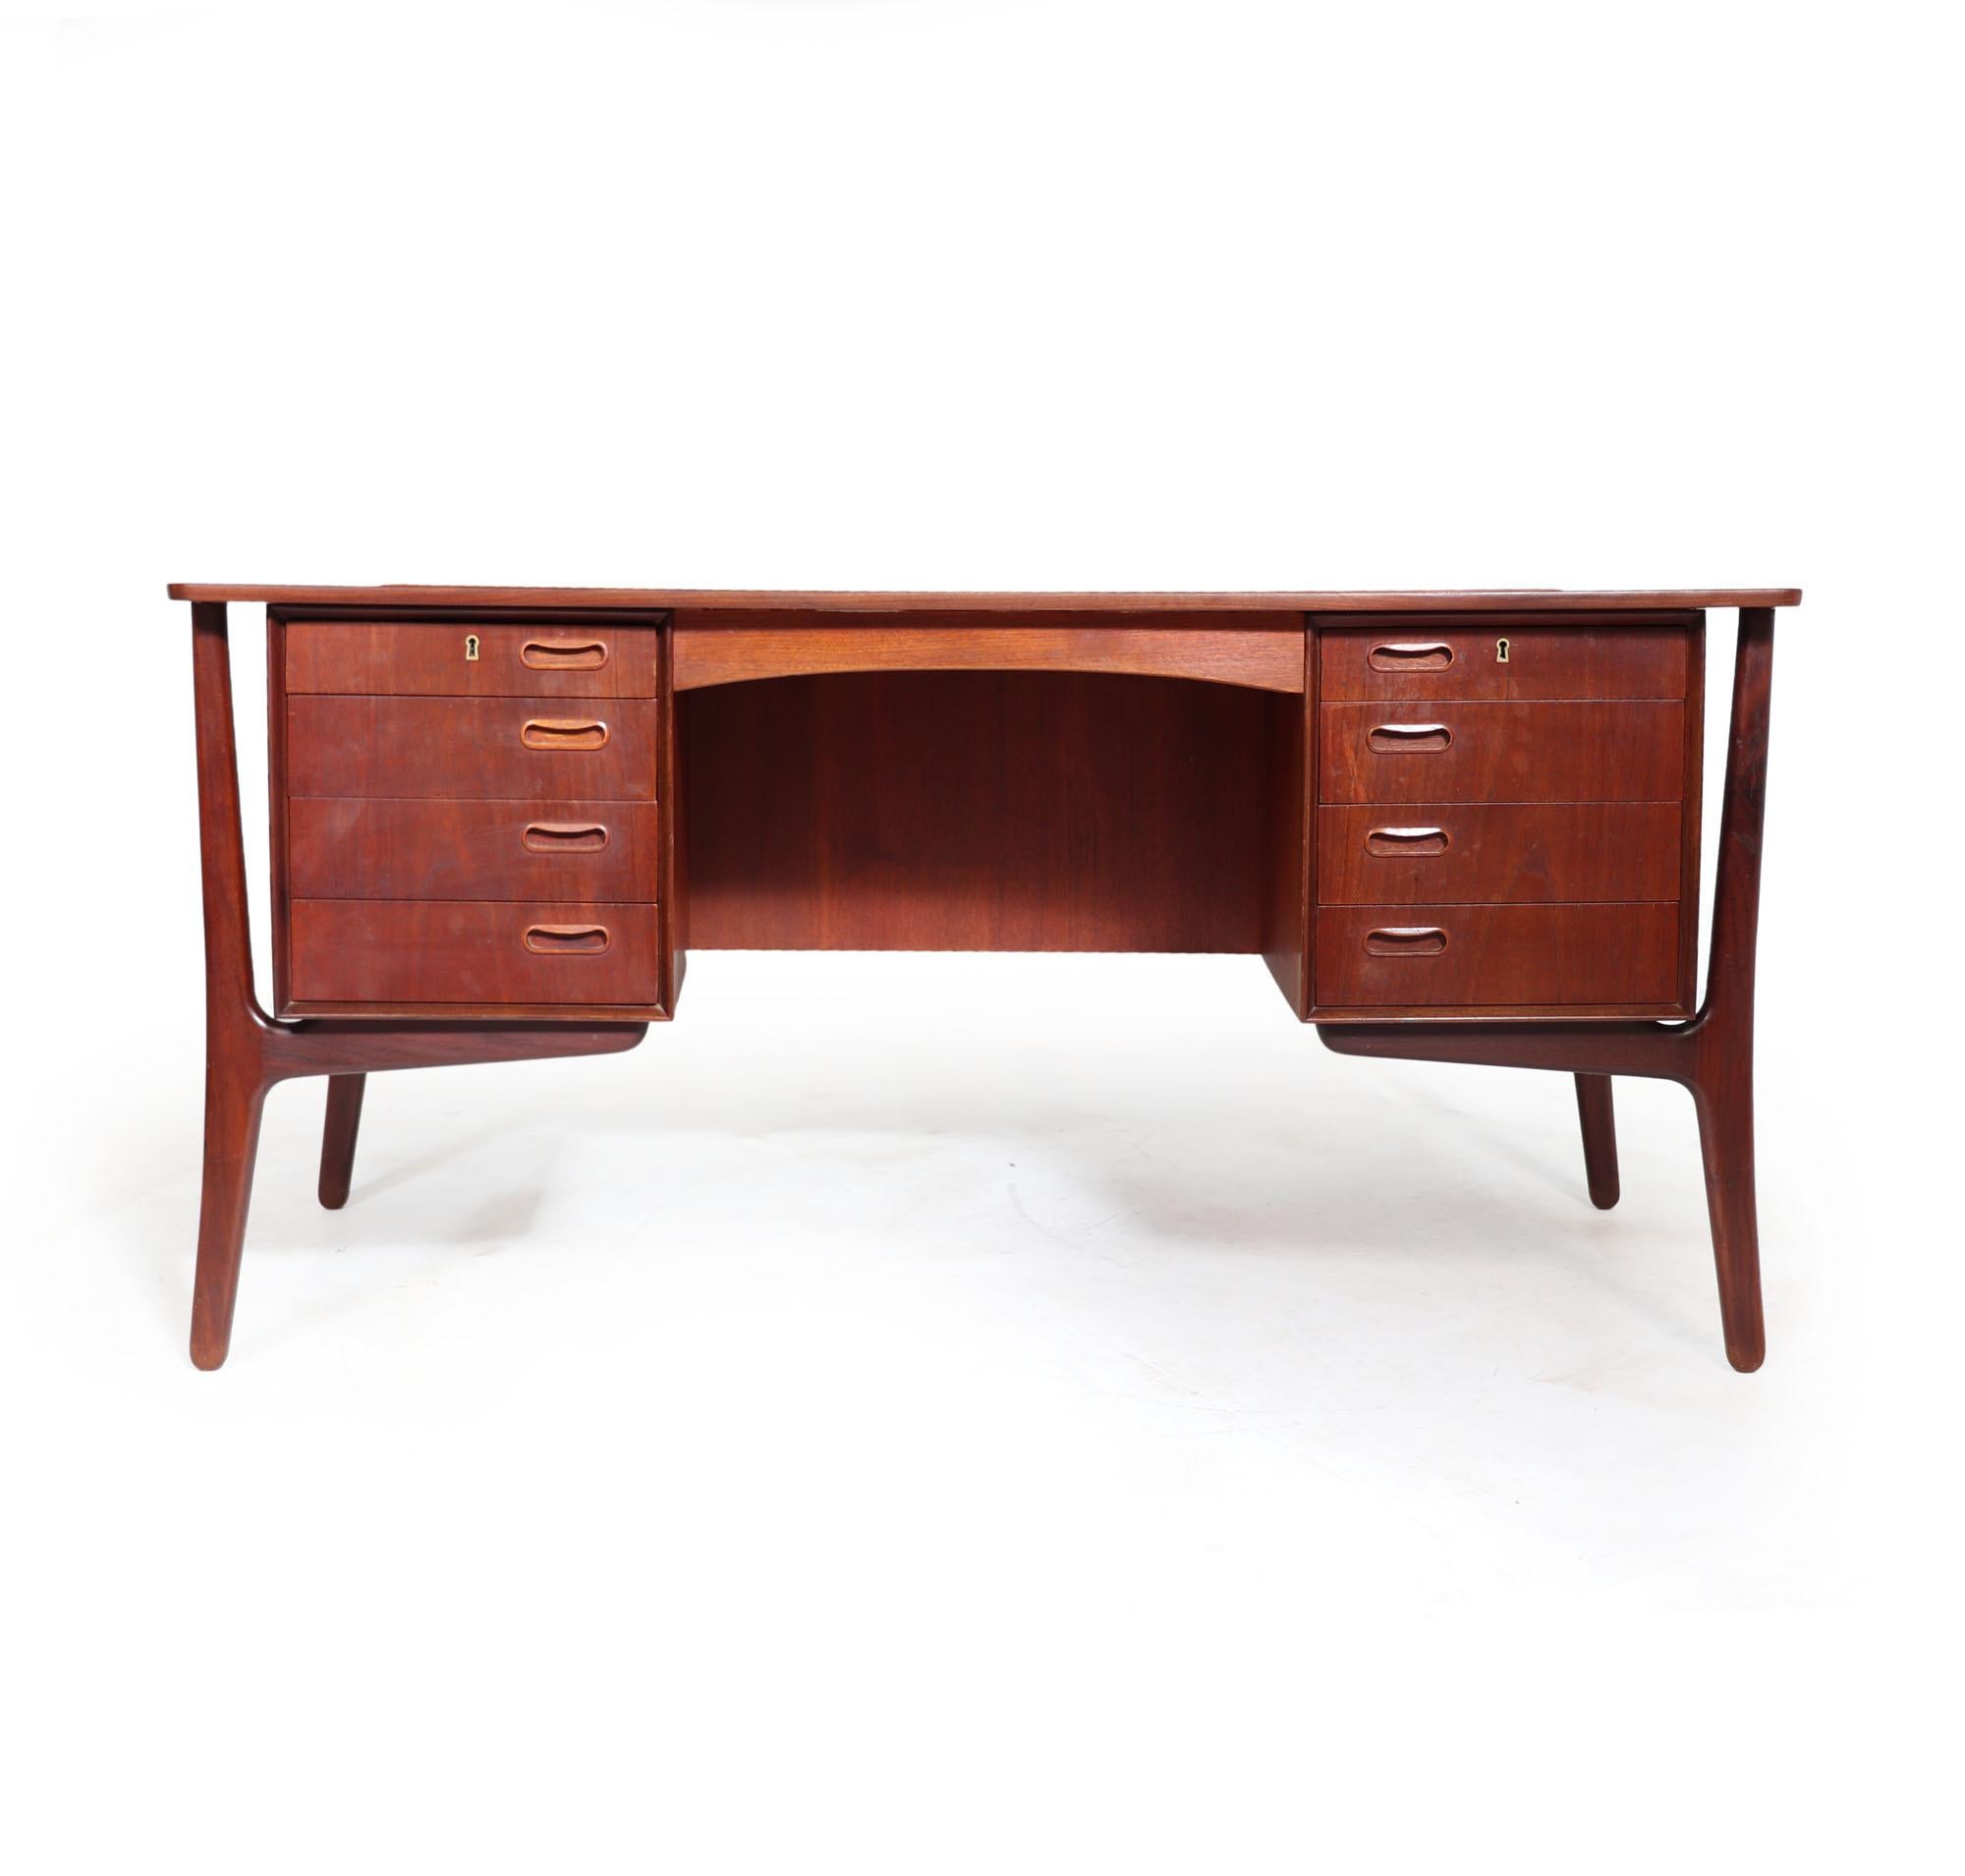 This desk is designed in the 1960s by Svend Age Madsen and manufactured by H.P. Hansen in Denmark. The desk features a curved desktop with beautiful lip detail on the back edge. Sculptural exterior legs support 'floating' banks of drawers with